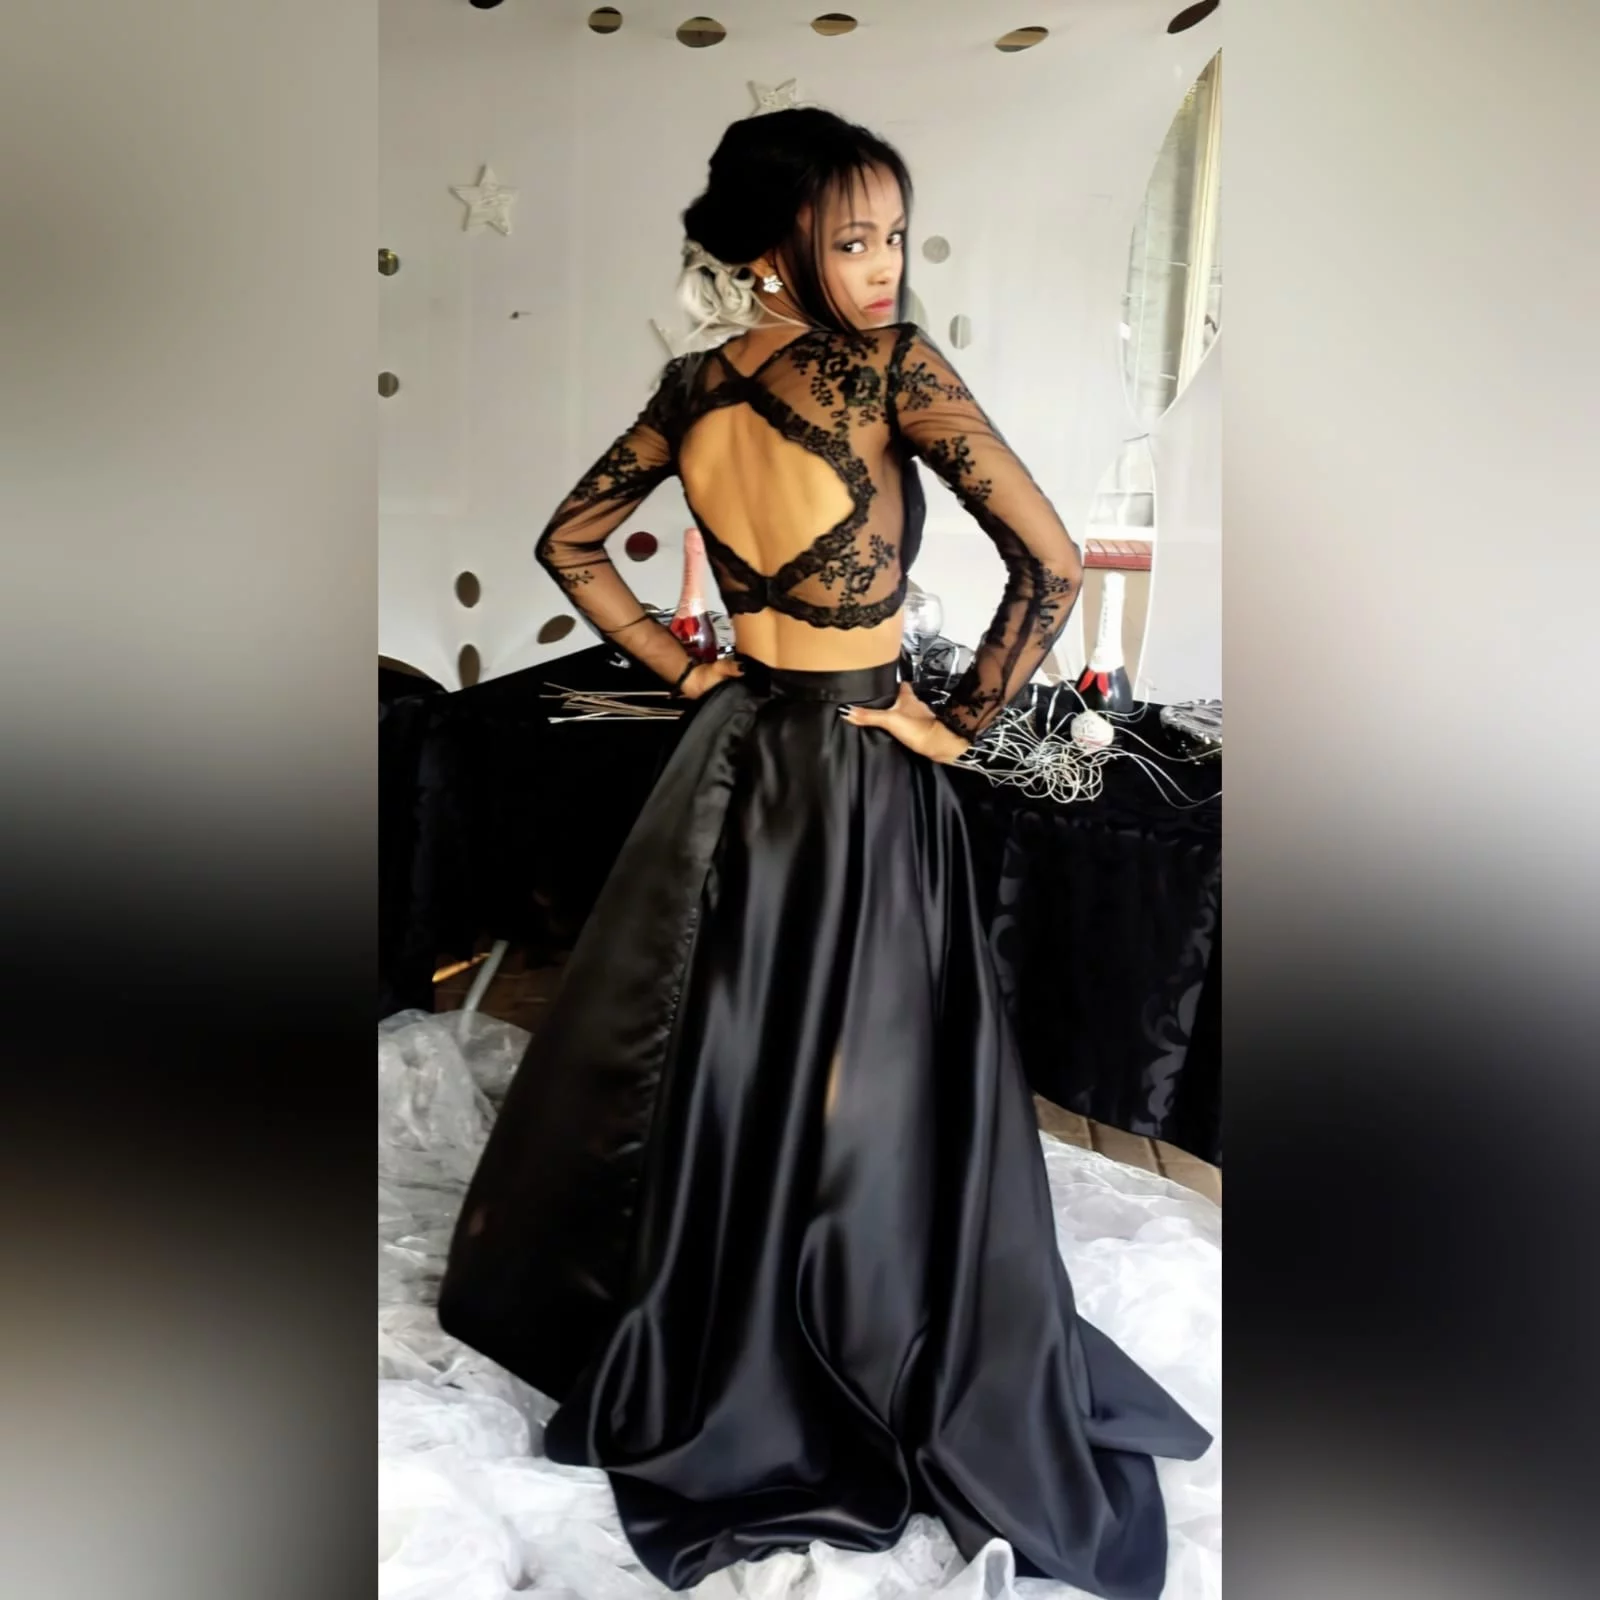 2 piece black prom dress with lace top 2 my client looked stunning in the 2 piece black prom dress i created for her. A lace top with sheer neckline and long sleeves, with a diamond shape opening. With a wide, flowy duchess's satin skirt